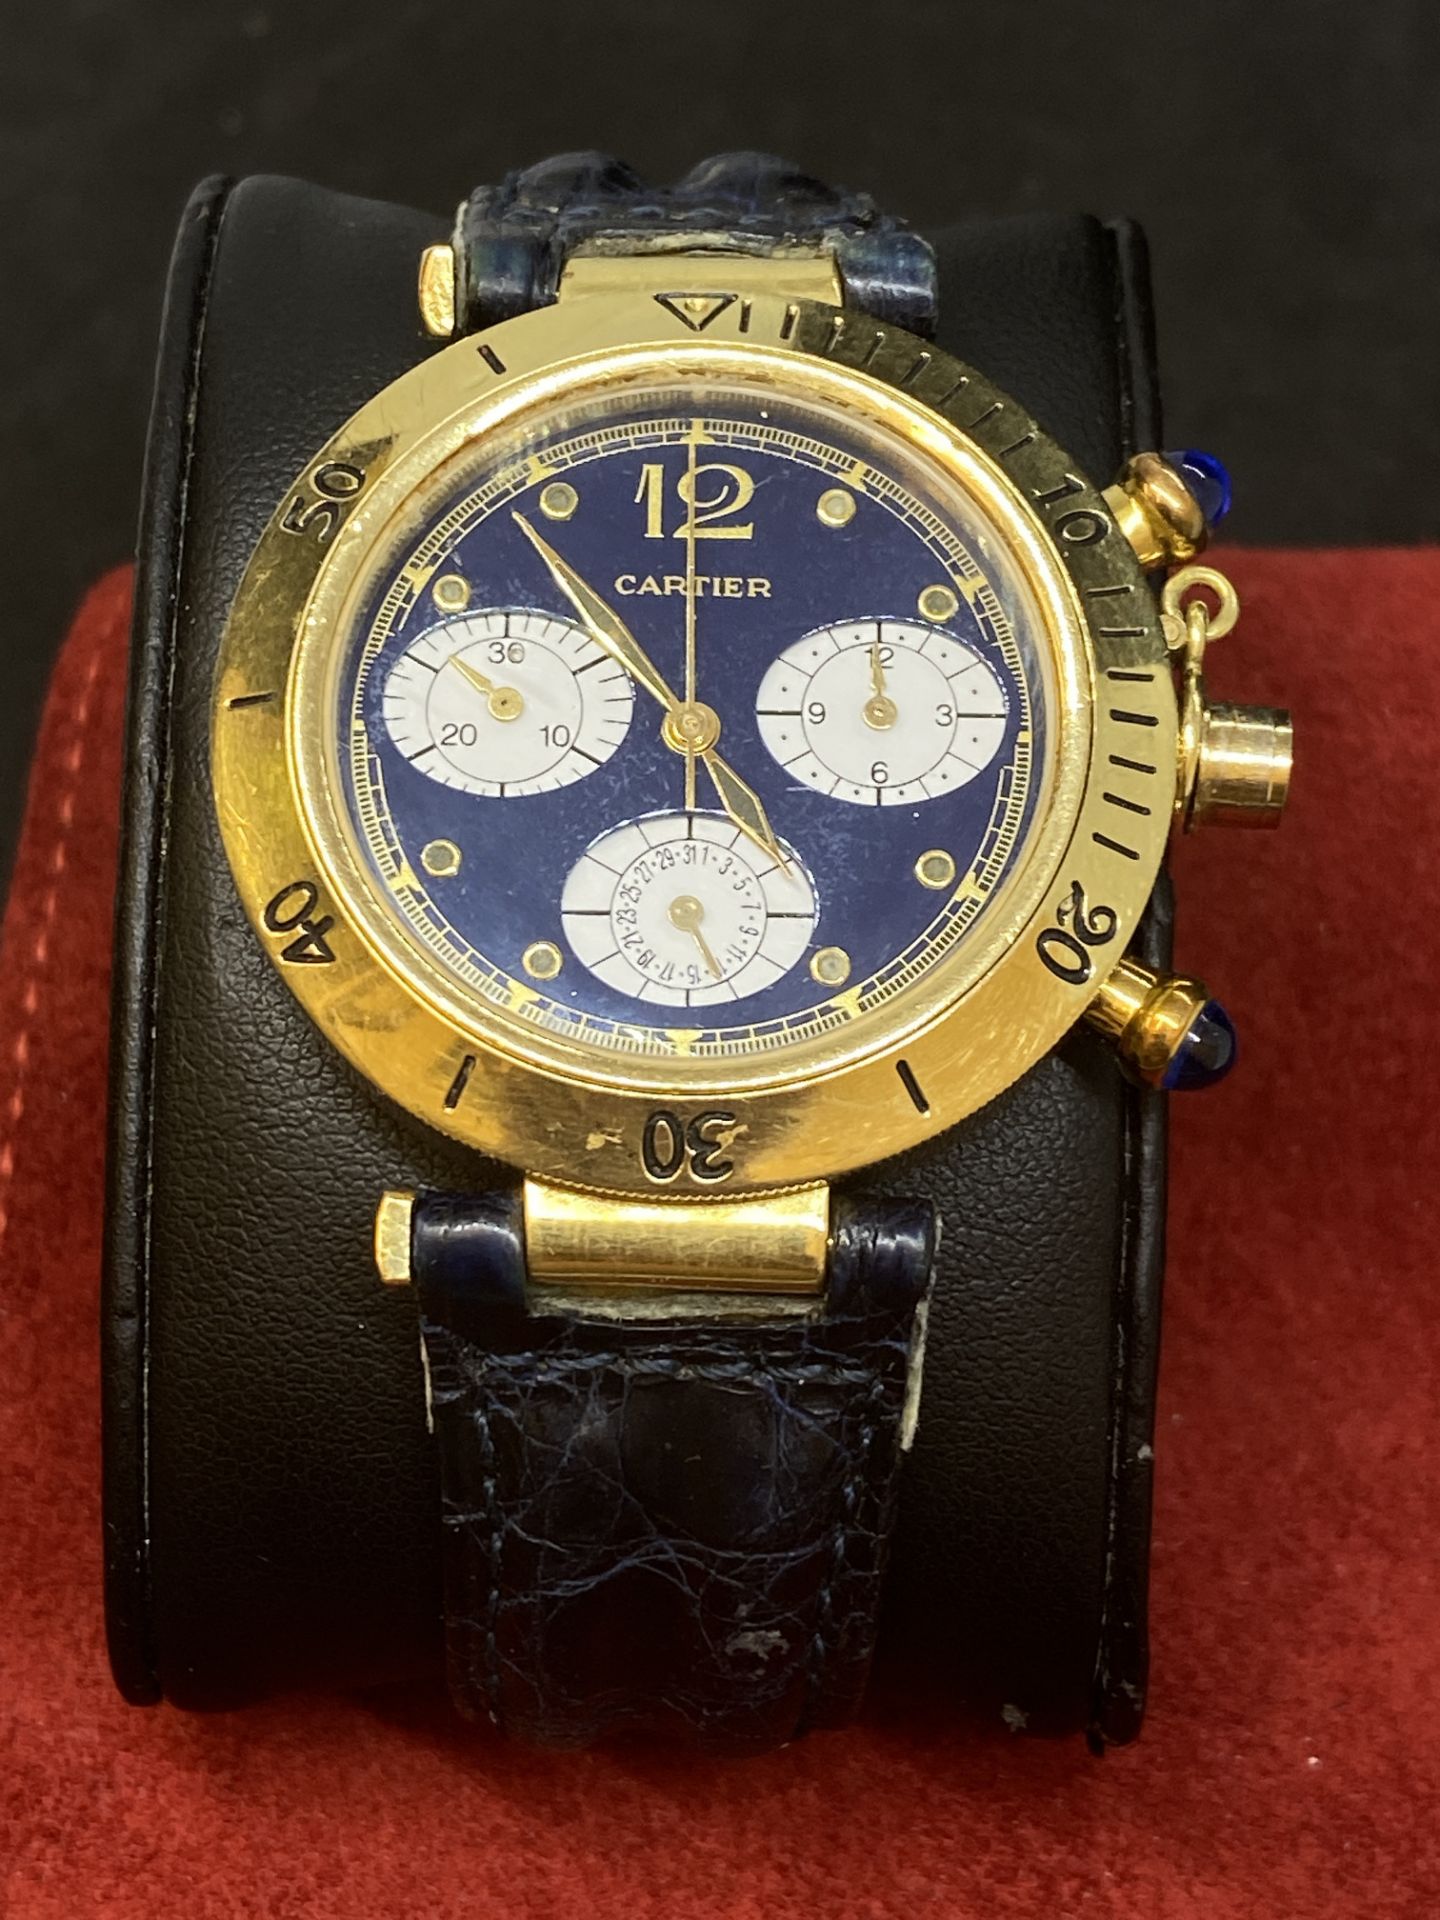 CARTIER CHRONO 18k GOLD WATCH - Image 5 of 12